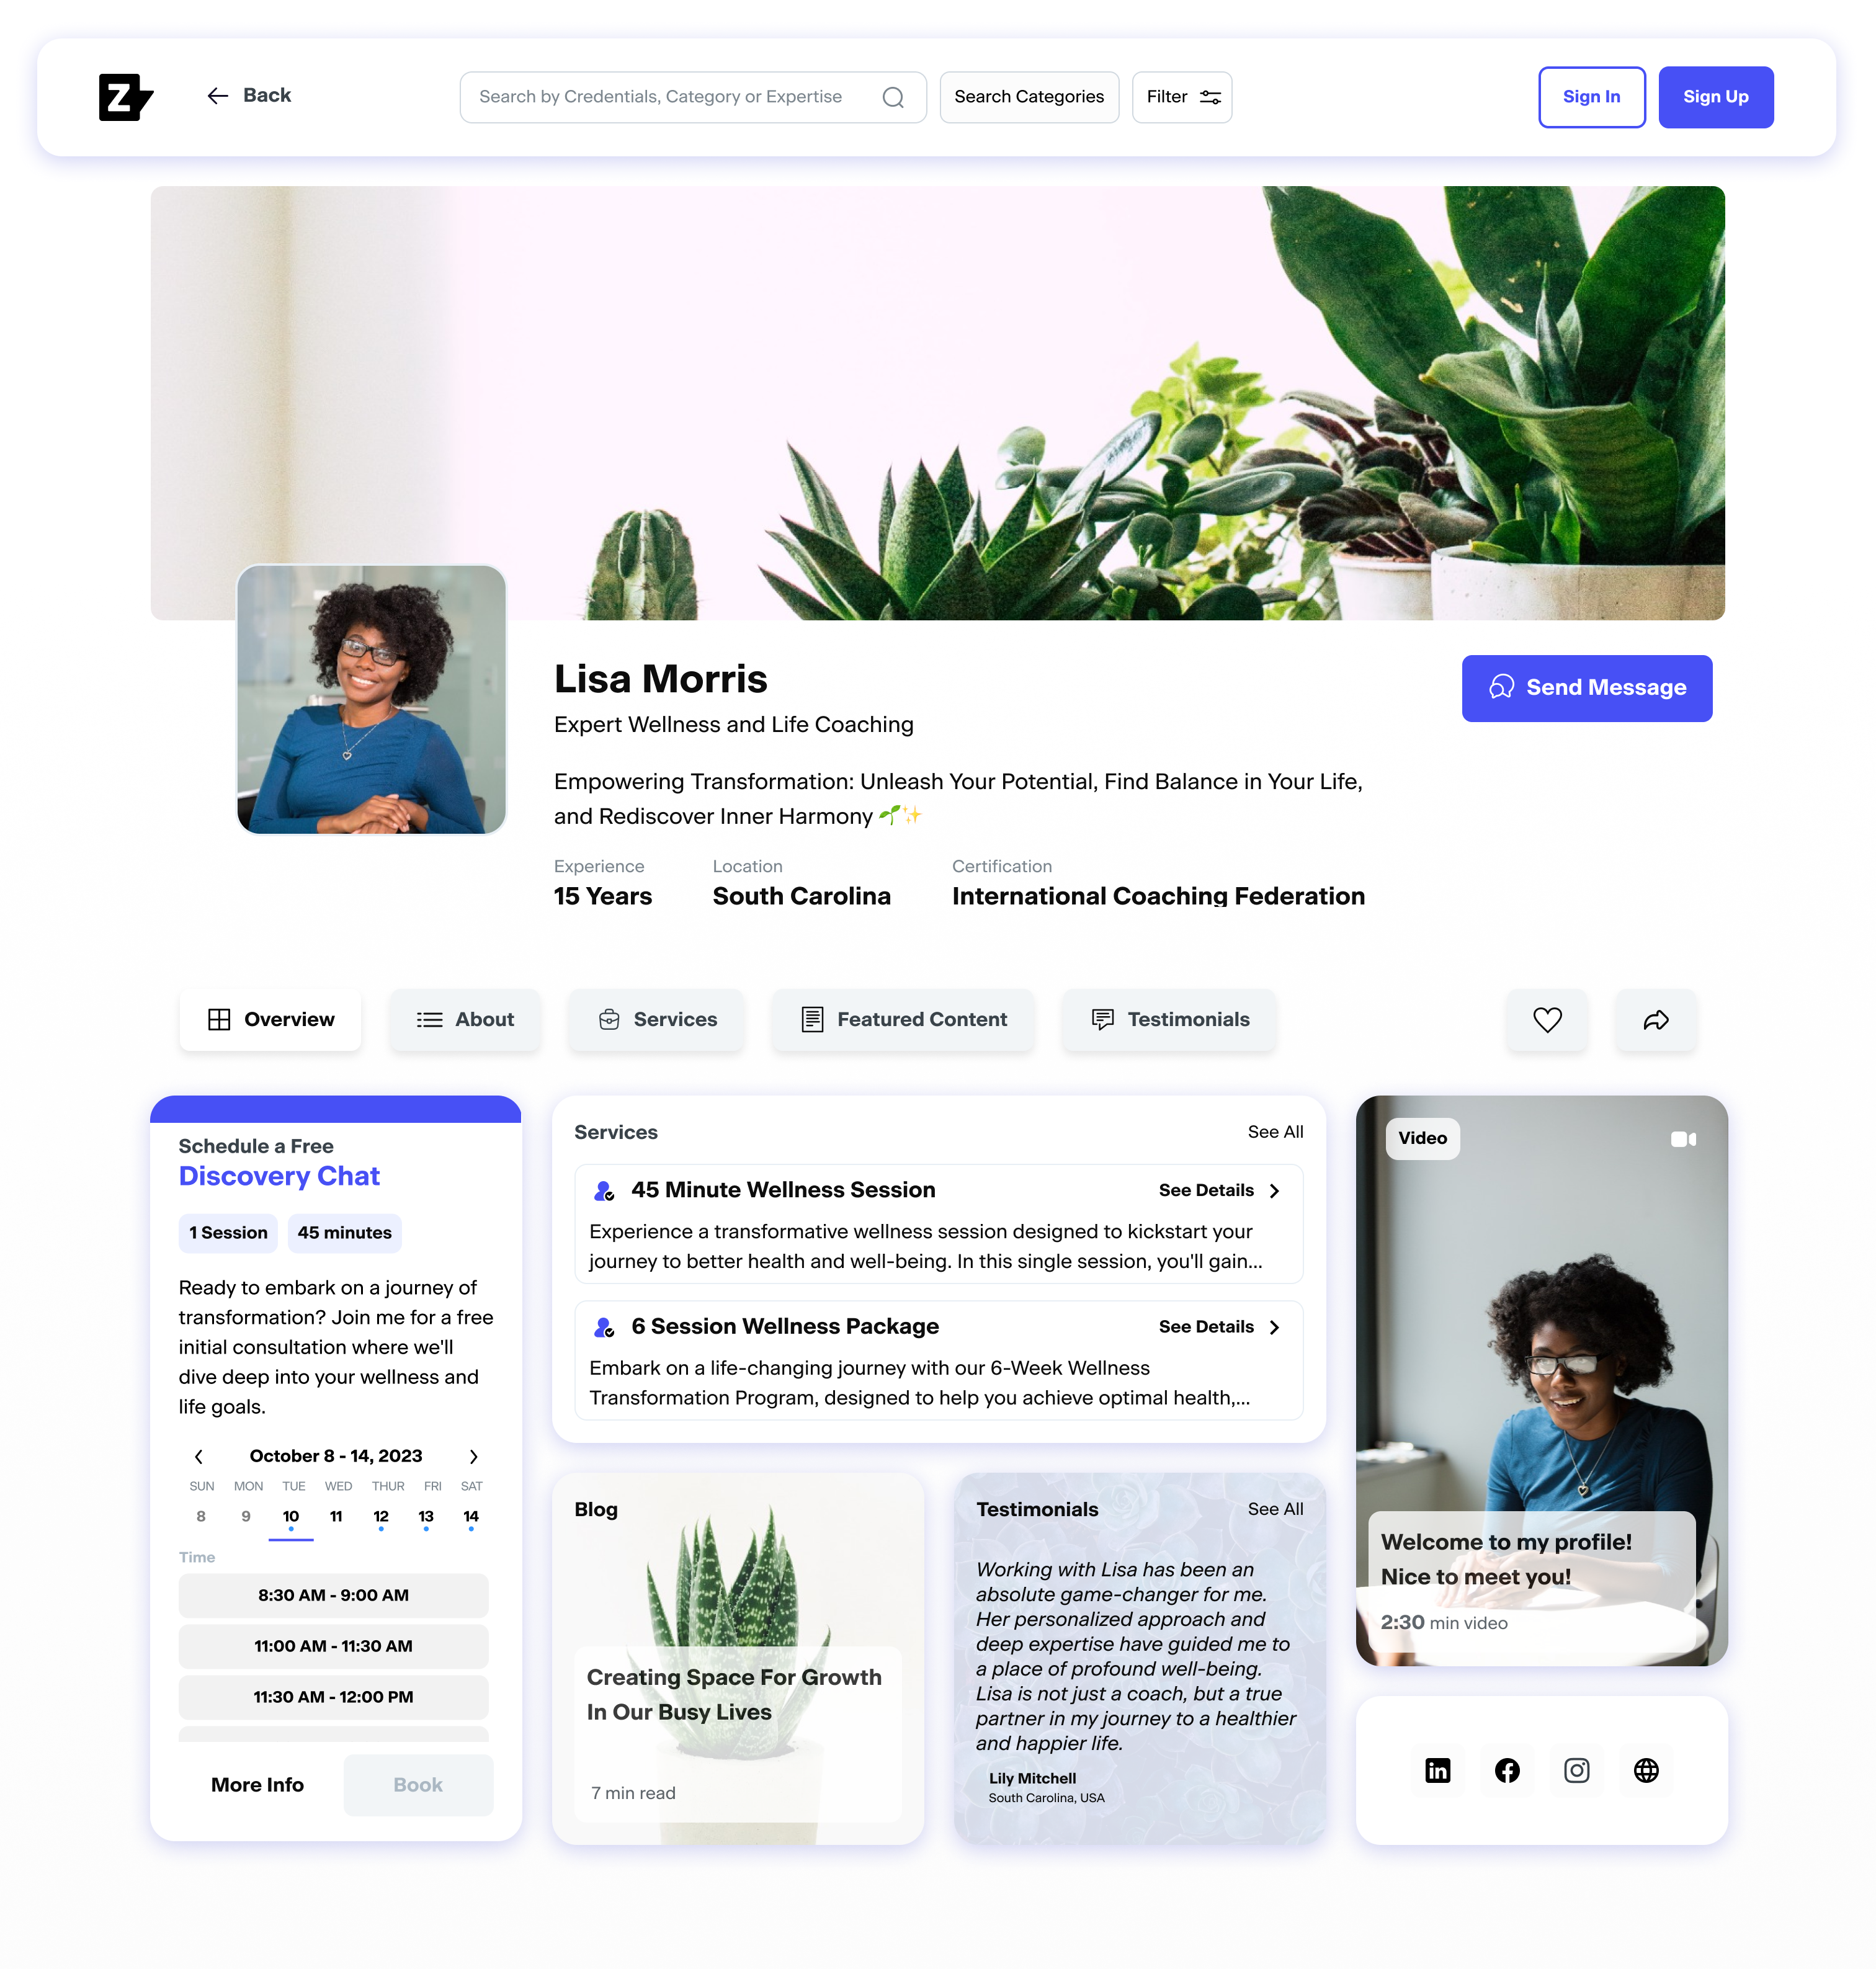 Personalized Profile Page